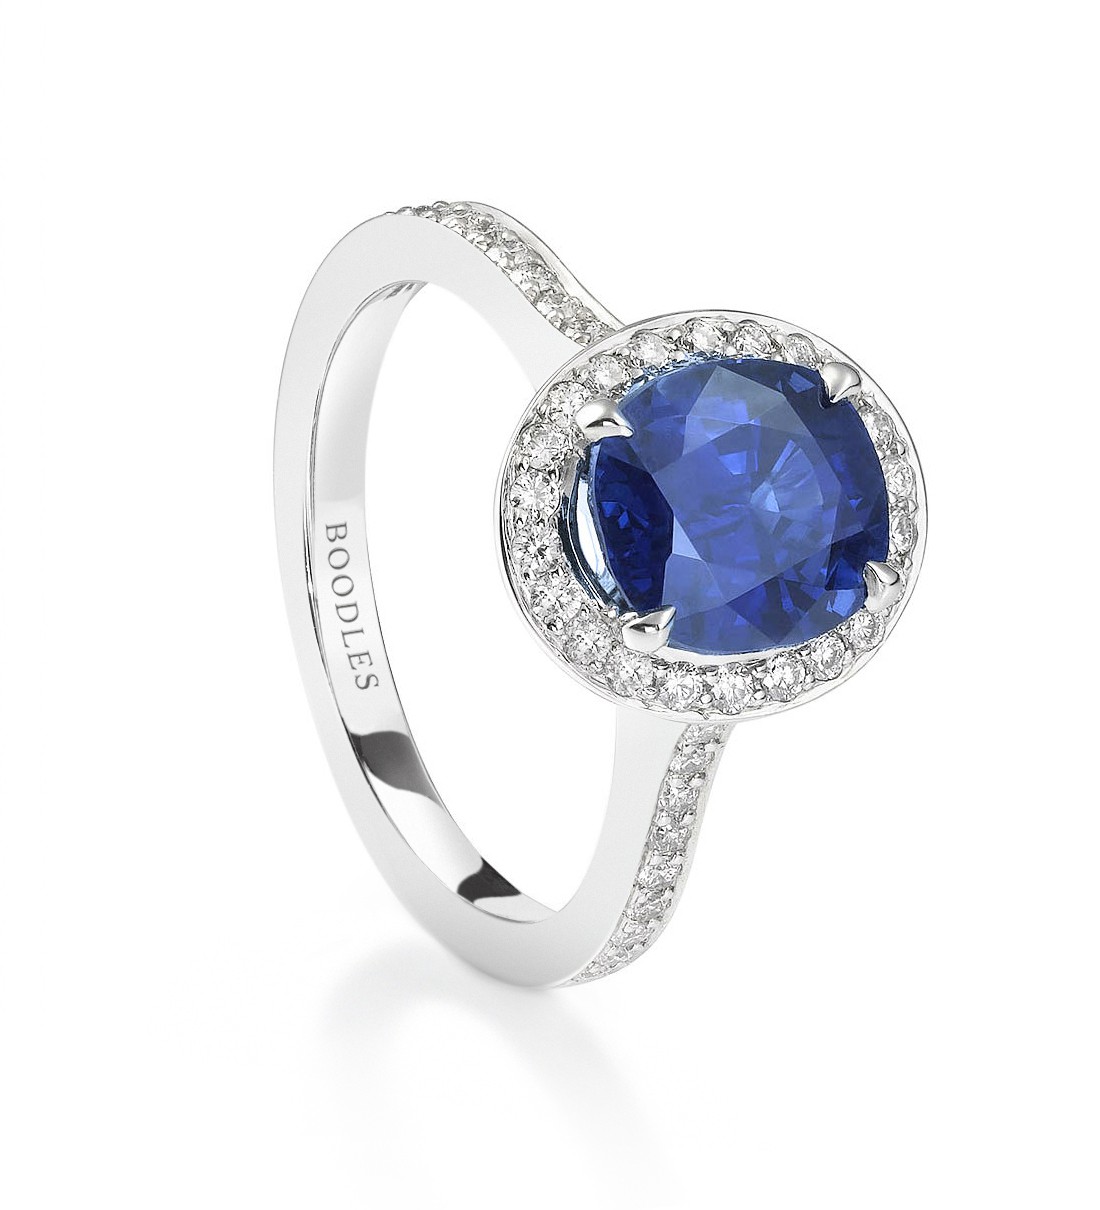 A Gorgeous Vintage Blue Sapphire Engagement Ring Oval Sapphire With ...